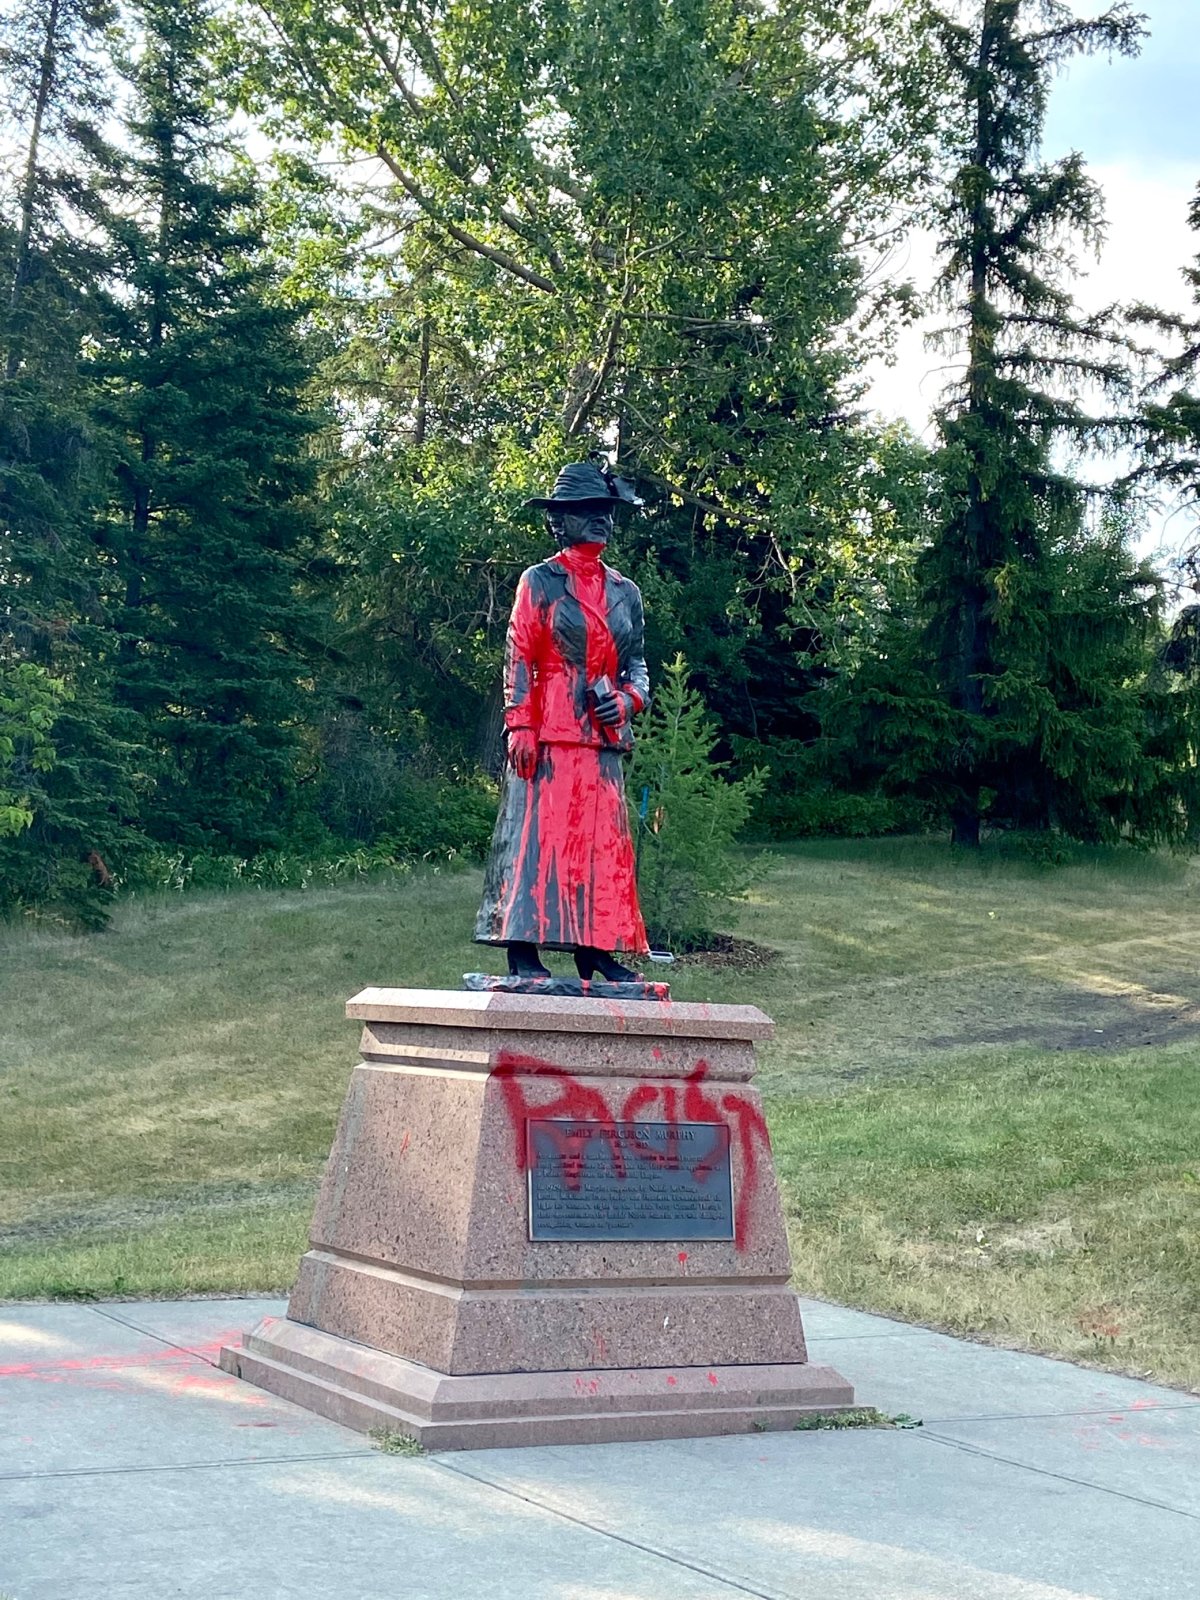 The Emily Murphy statue in Edmonton defaced with red paint and the word "racist" Tuesday, July 13, 2021.